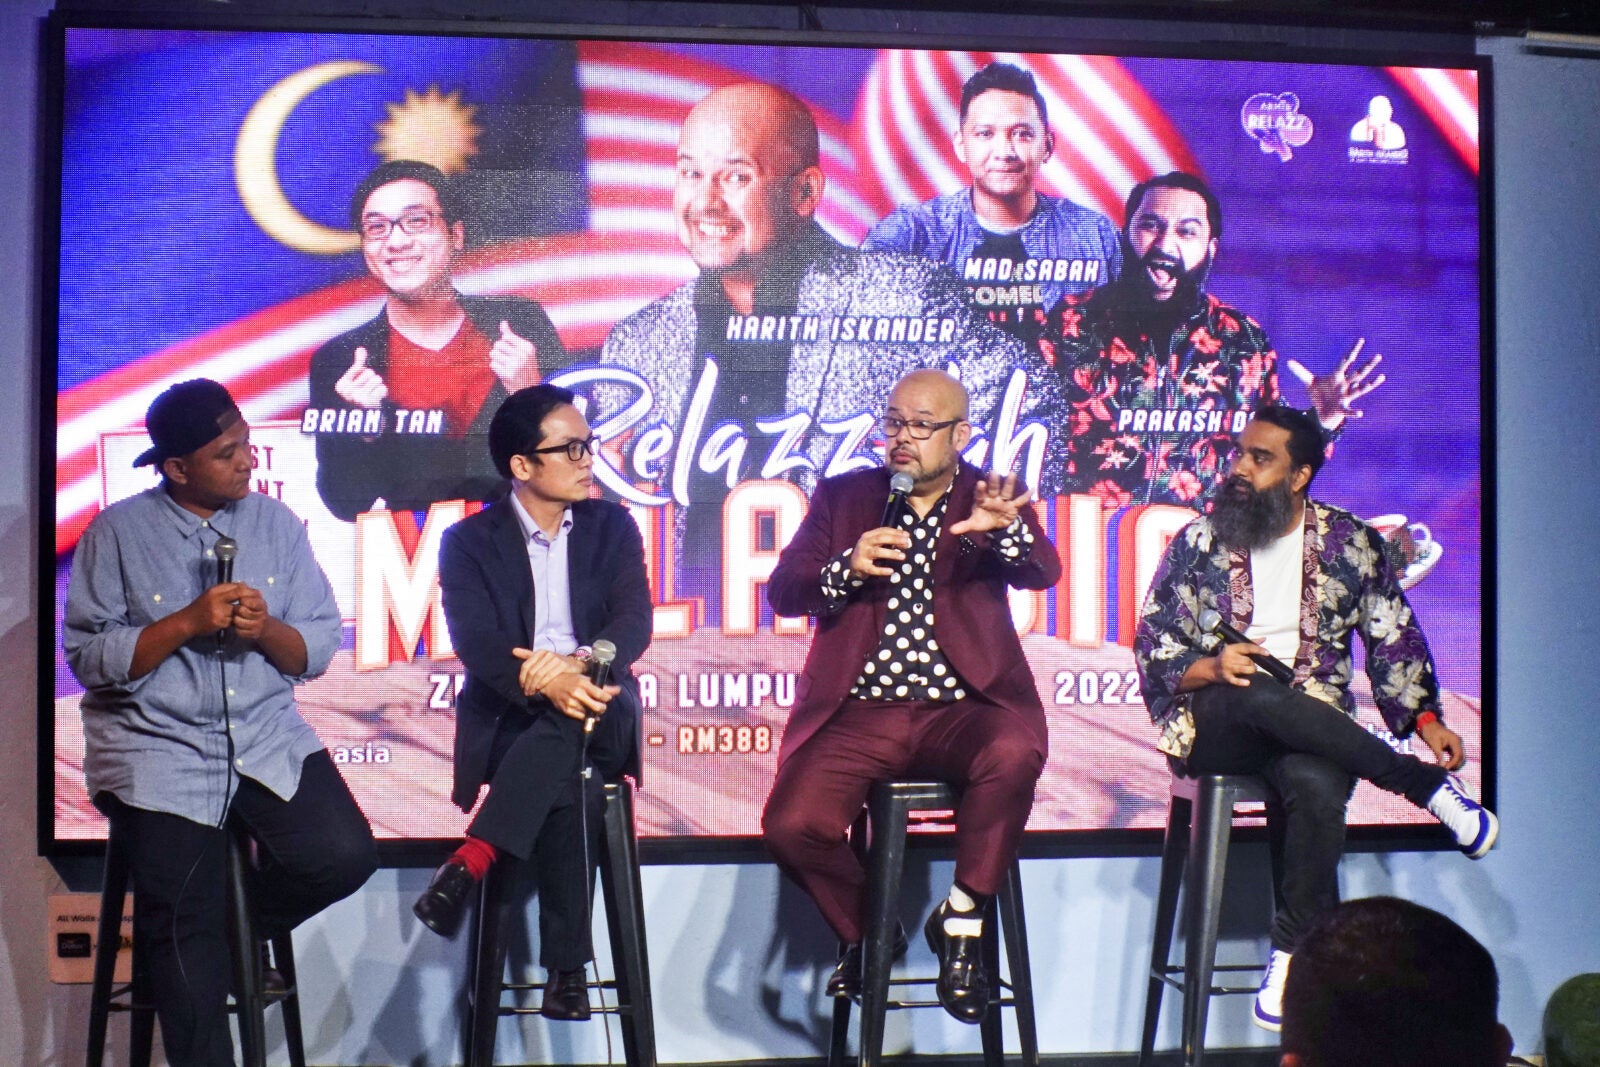 Four Men Sit On A Stool On Stage In Front Of A Screen With Their Faces On It For An Upcoming Event Called &Quot;Relazz-Lah Malaysia&Quot;. They Are Each Holding A Microphone.